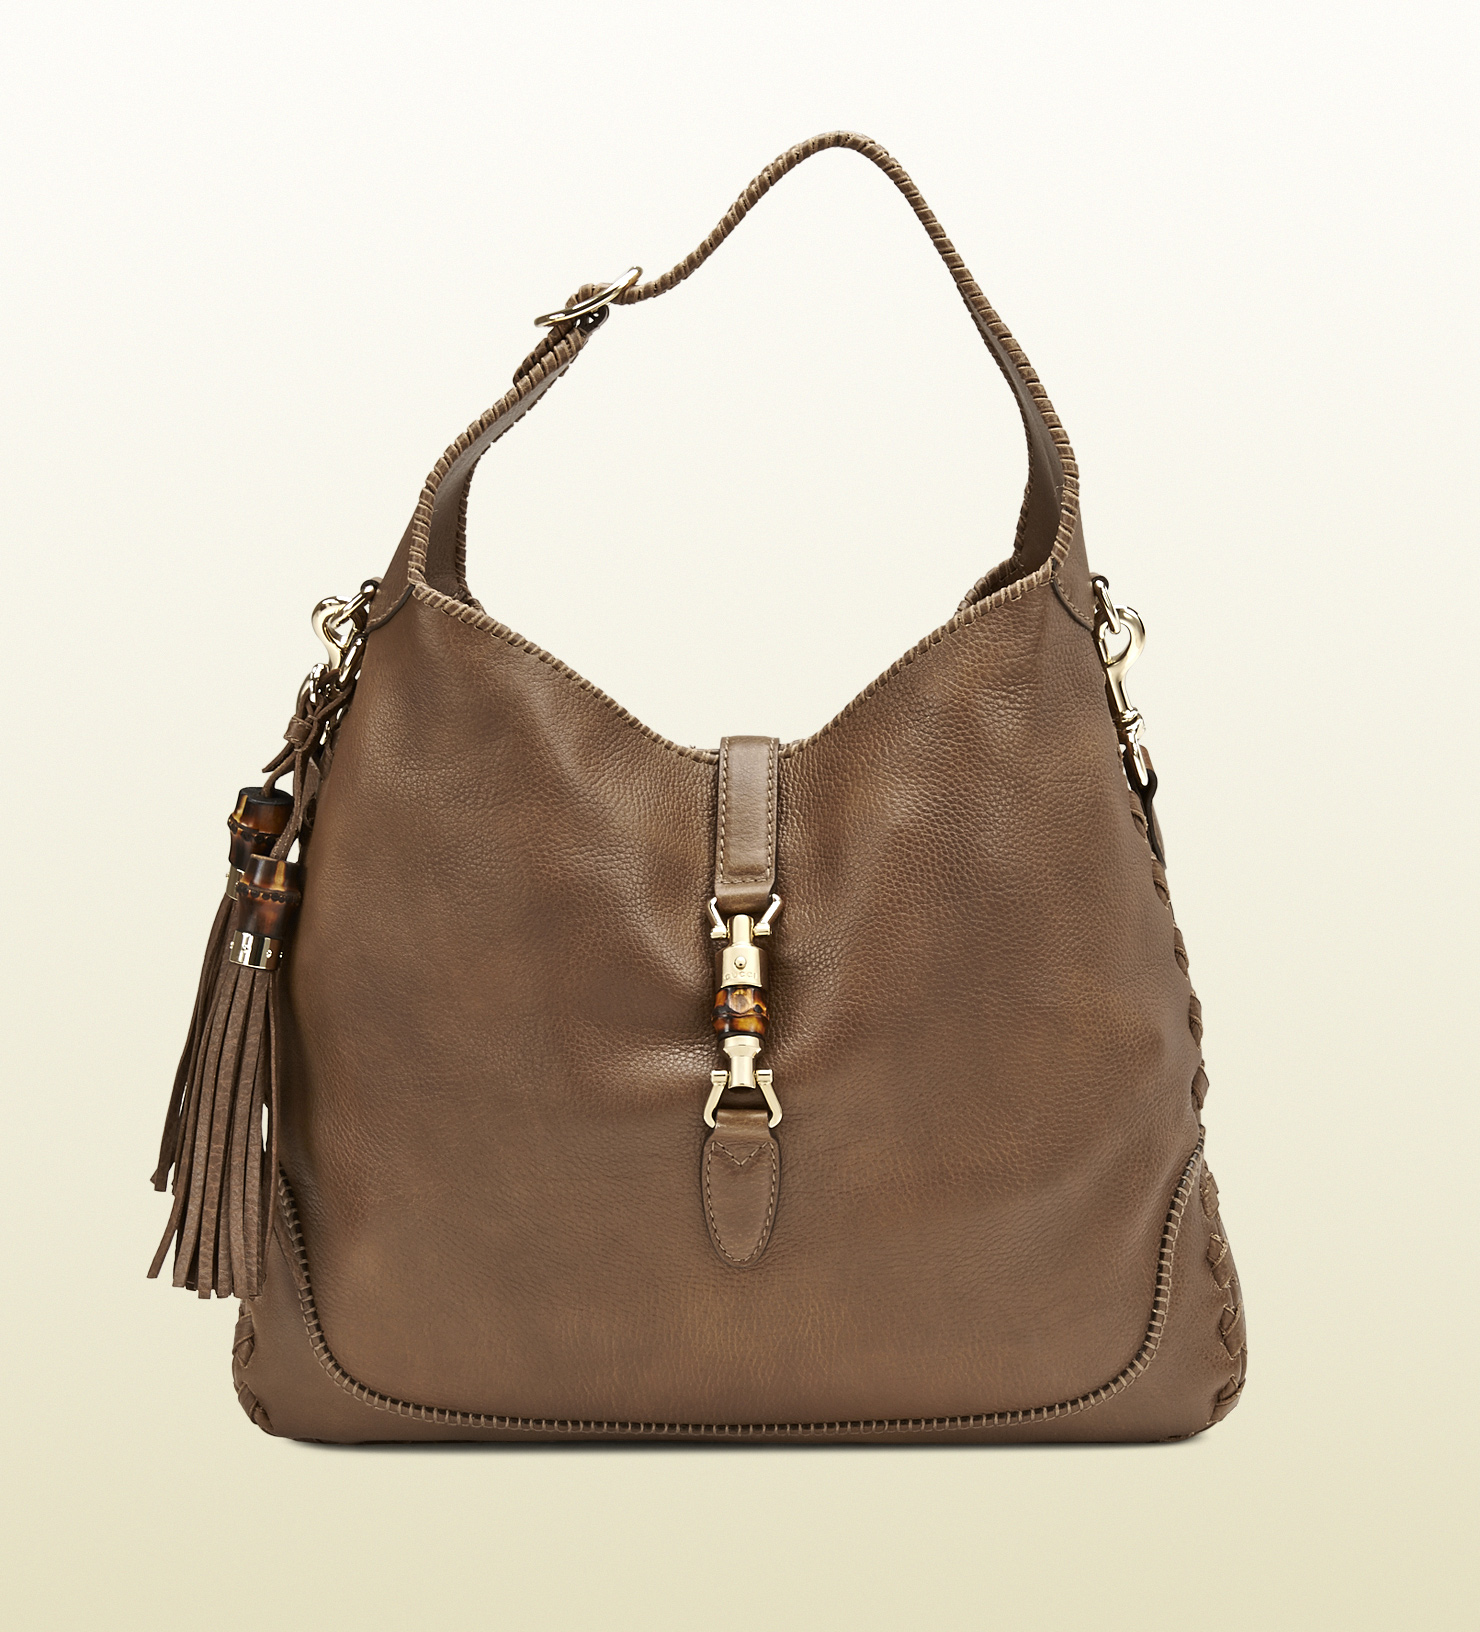 Lyst - Gucci New Jackie Leather Shoulder Bag in Brown